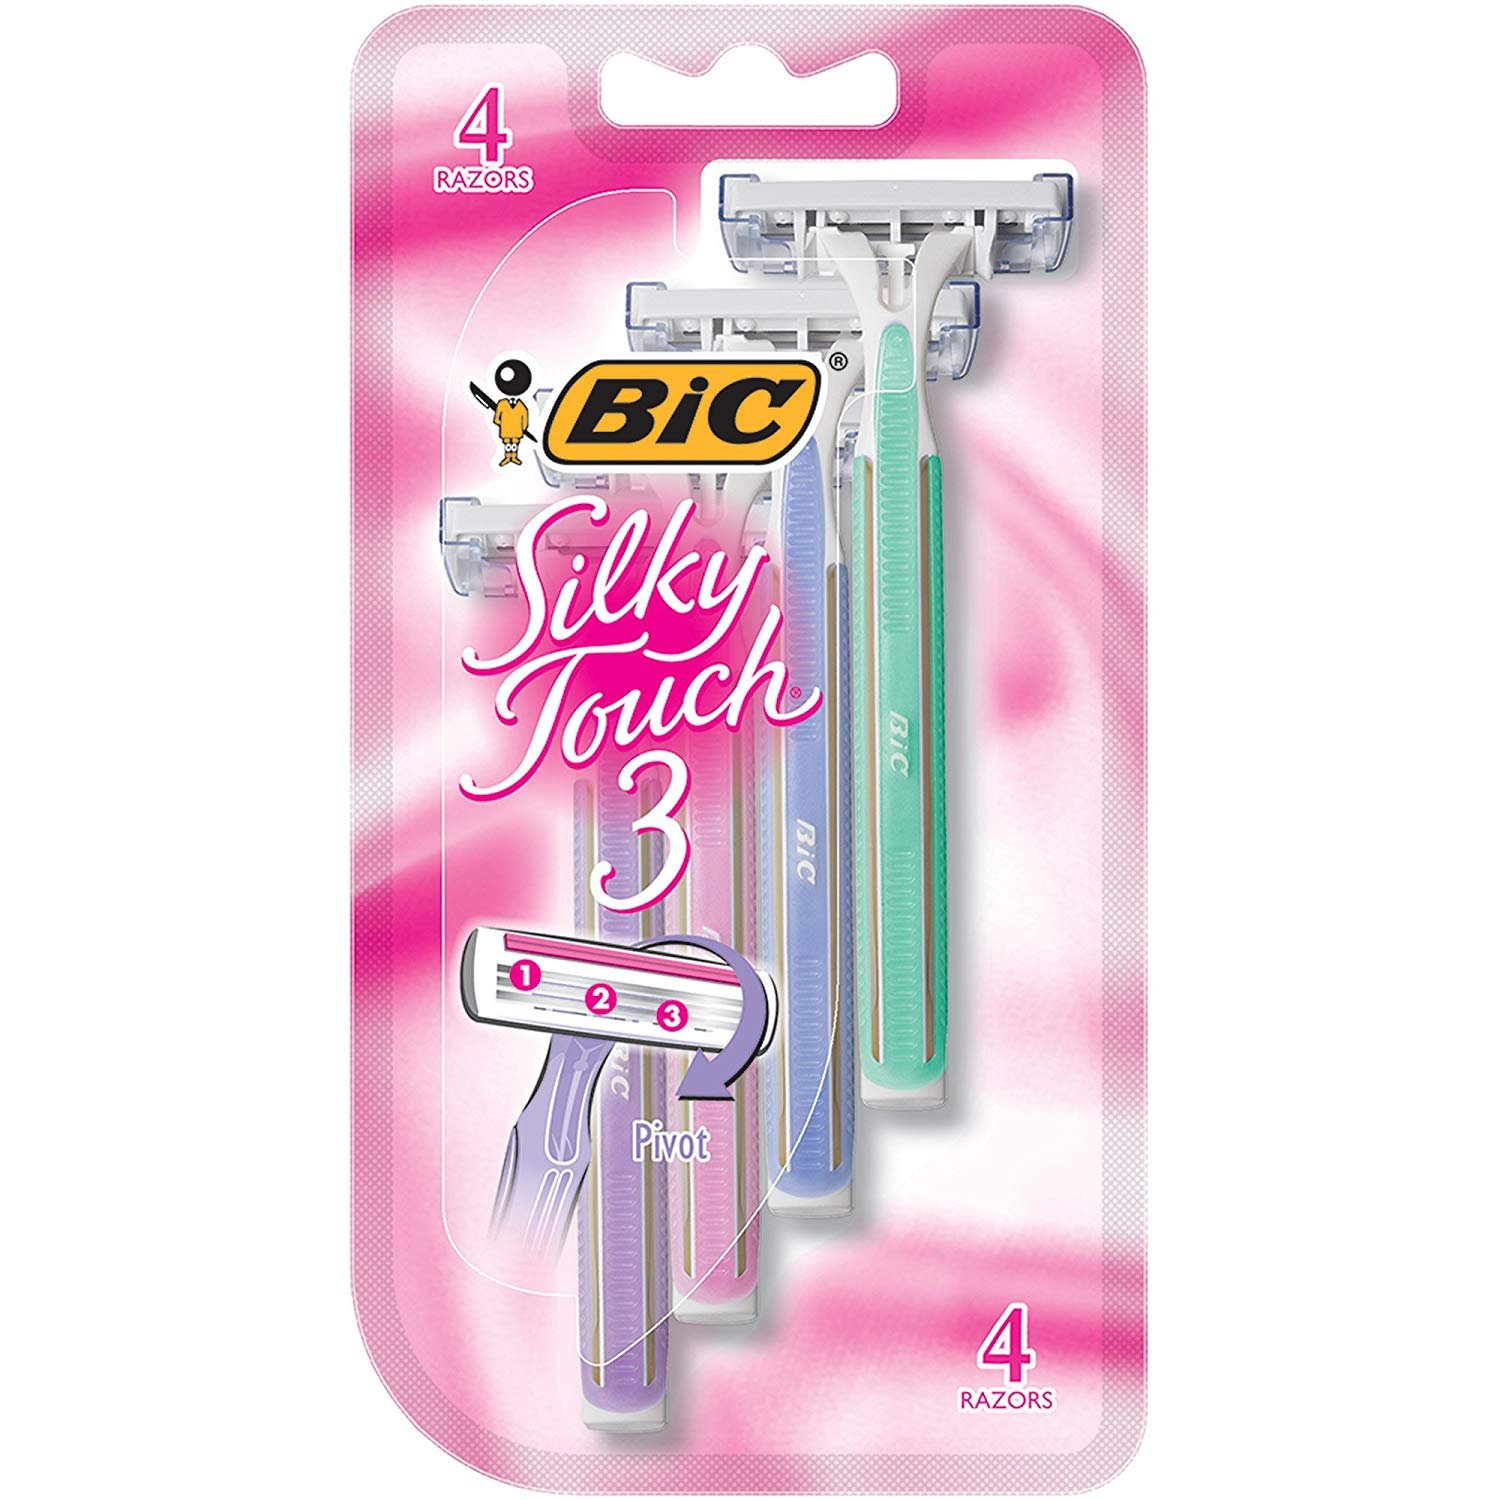 Silky Touch BIC 3, Triple Blade Women's Razor Shaver, 4 Count - image 1 of 8